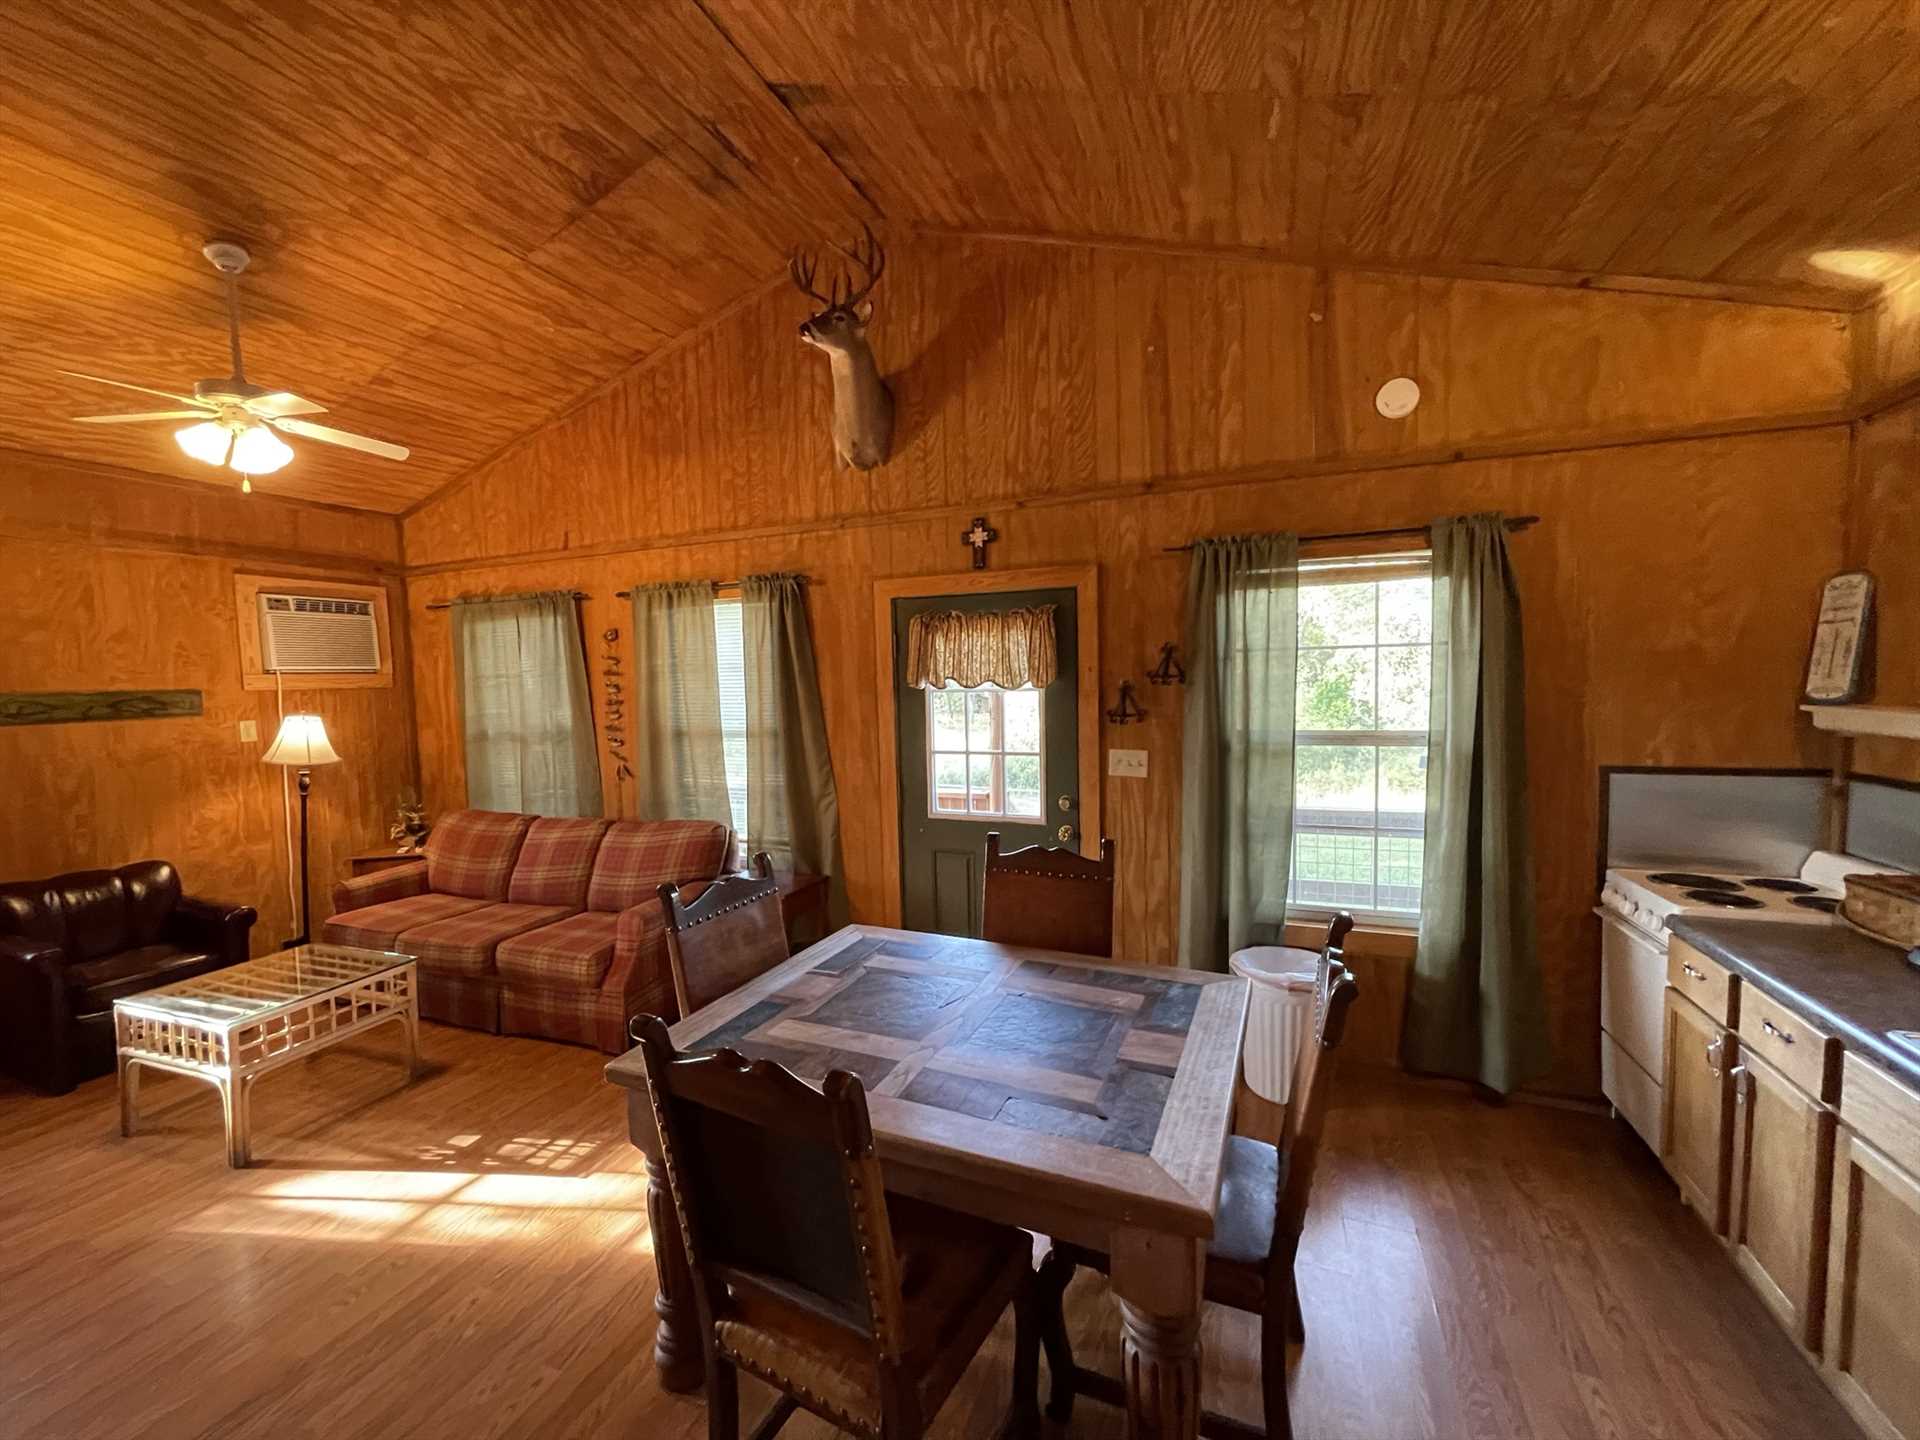                                                 The wide-open floor plan of the Gone Fishin' Cabin includes a fully-stocked kitchen, dining area, and roomy and inviting living space.